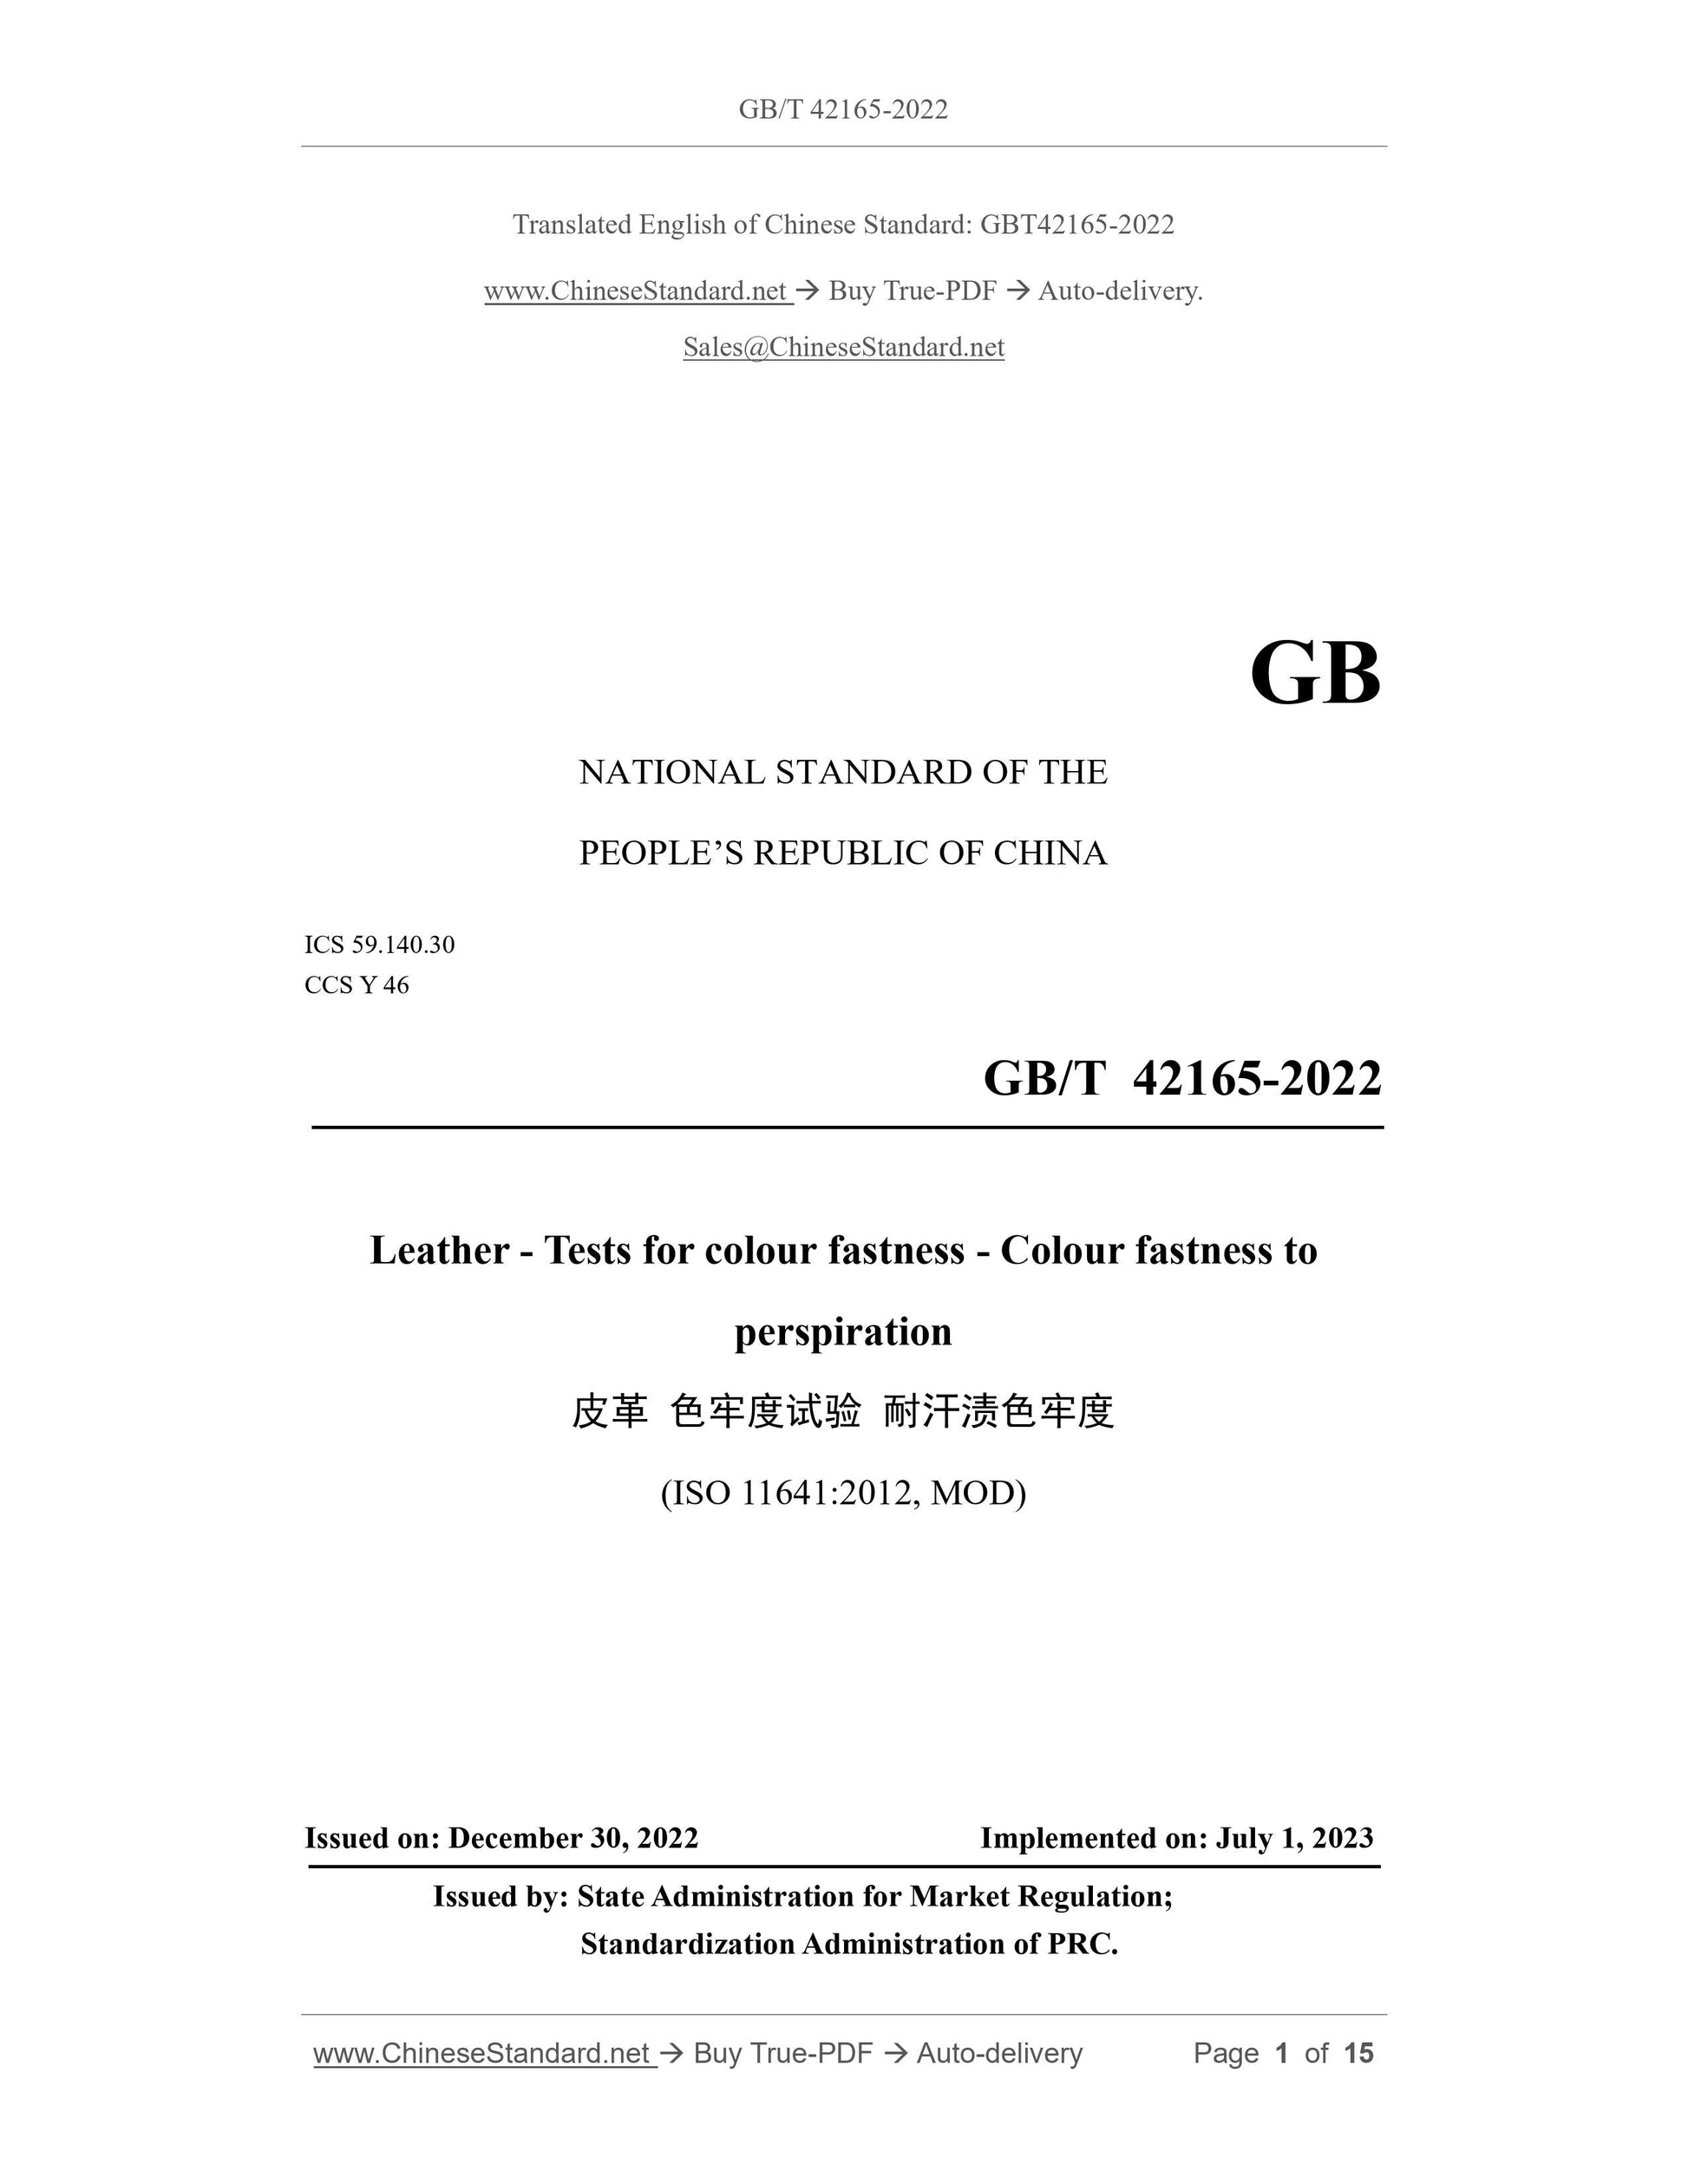 GB/T 42165-2022 Page 1